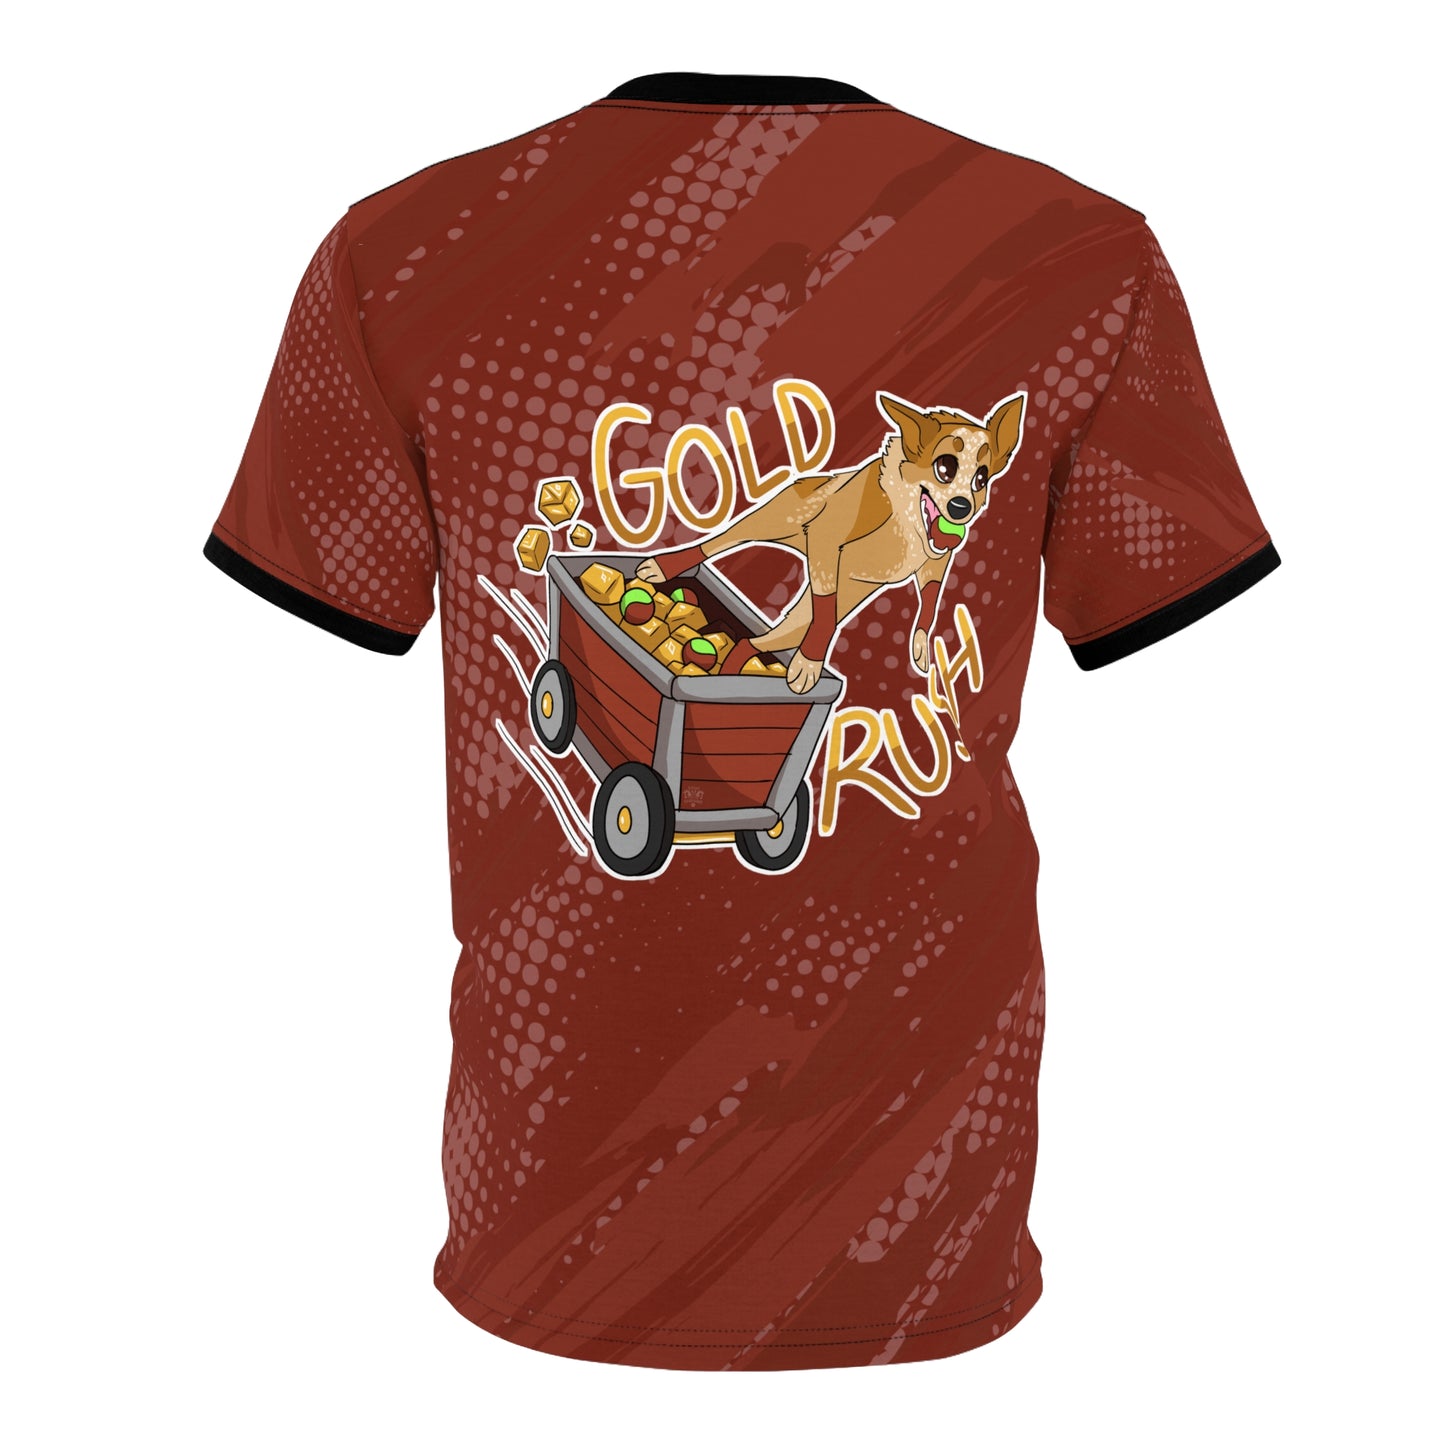 GOLD RUSH FLYBALL Unisex JERSEY